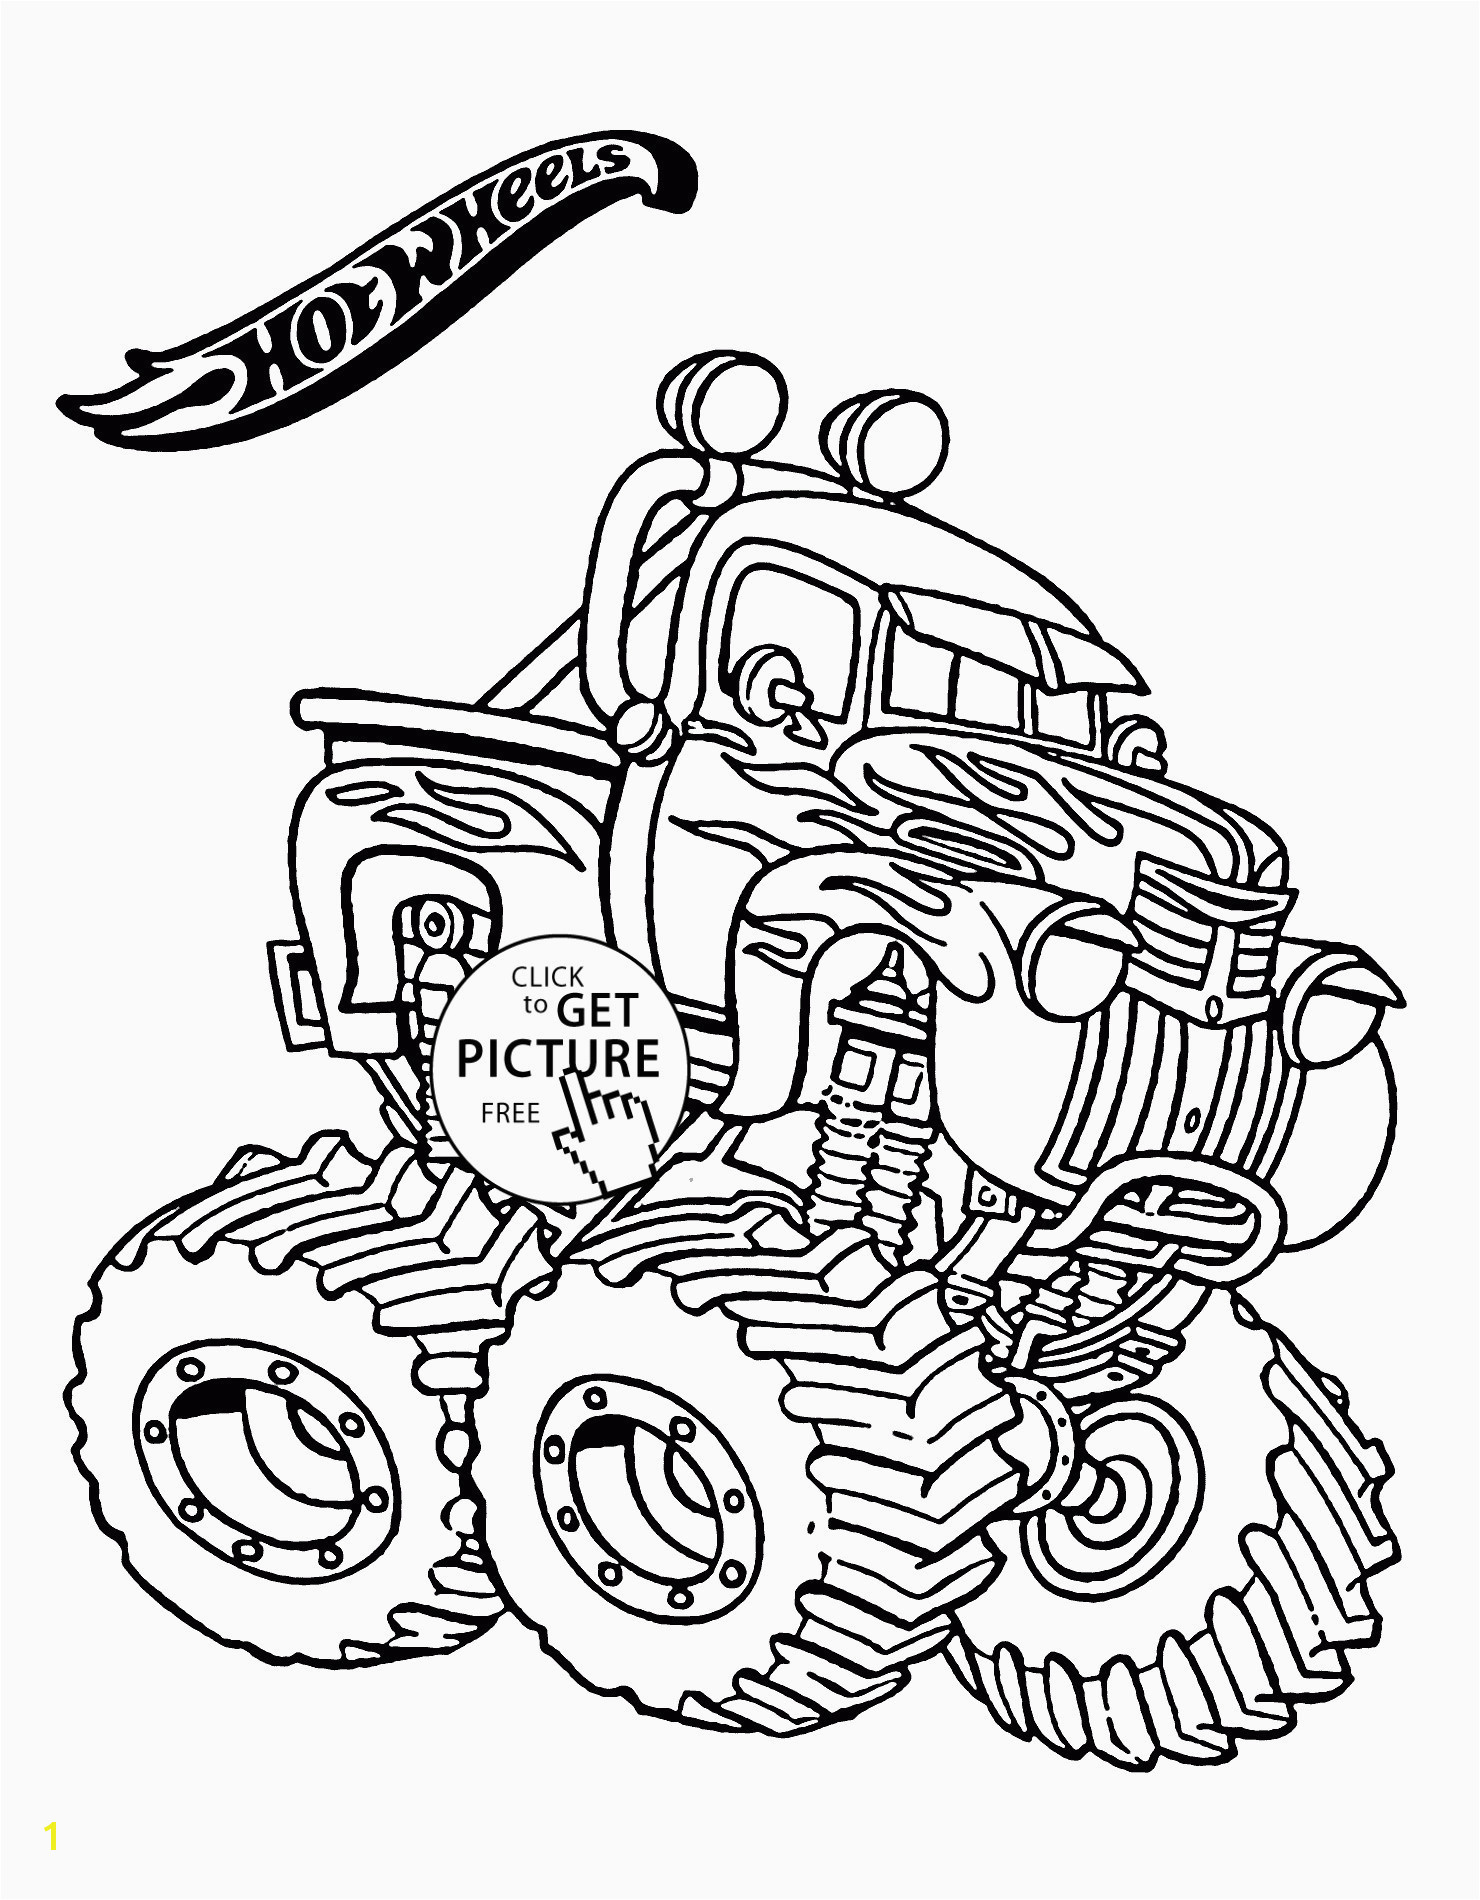 Tire Coloring Pages Learn to Draw Cars Best 15 New Cars and Trucks Coloring Pages